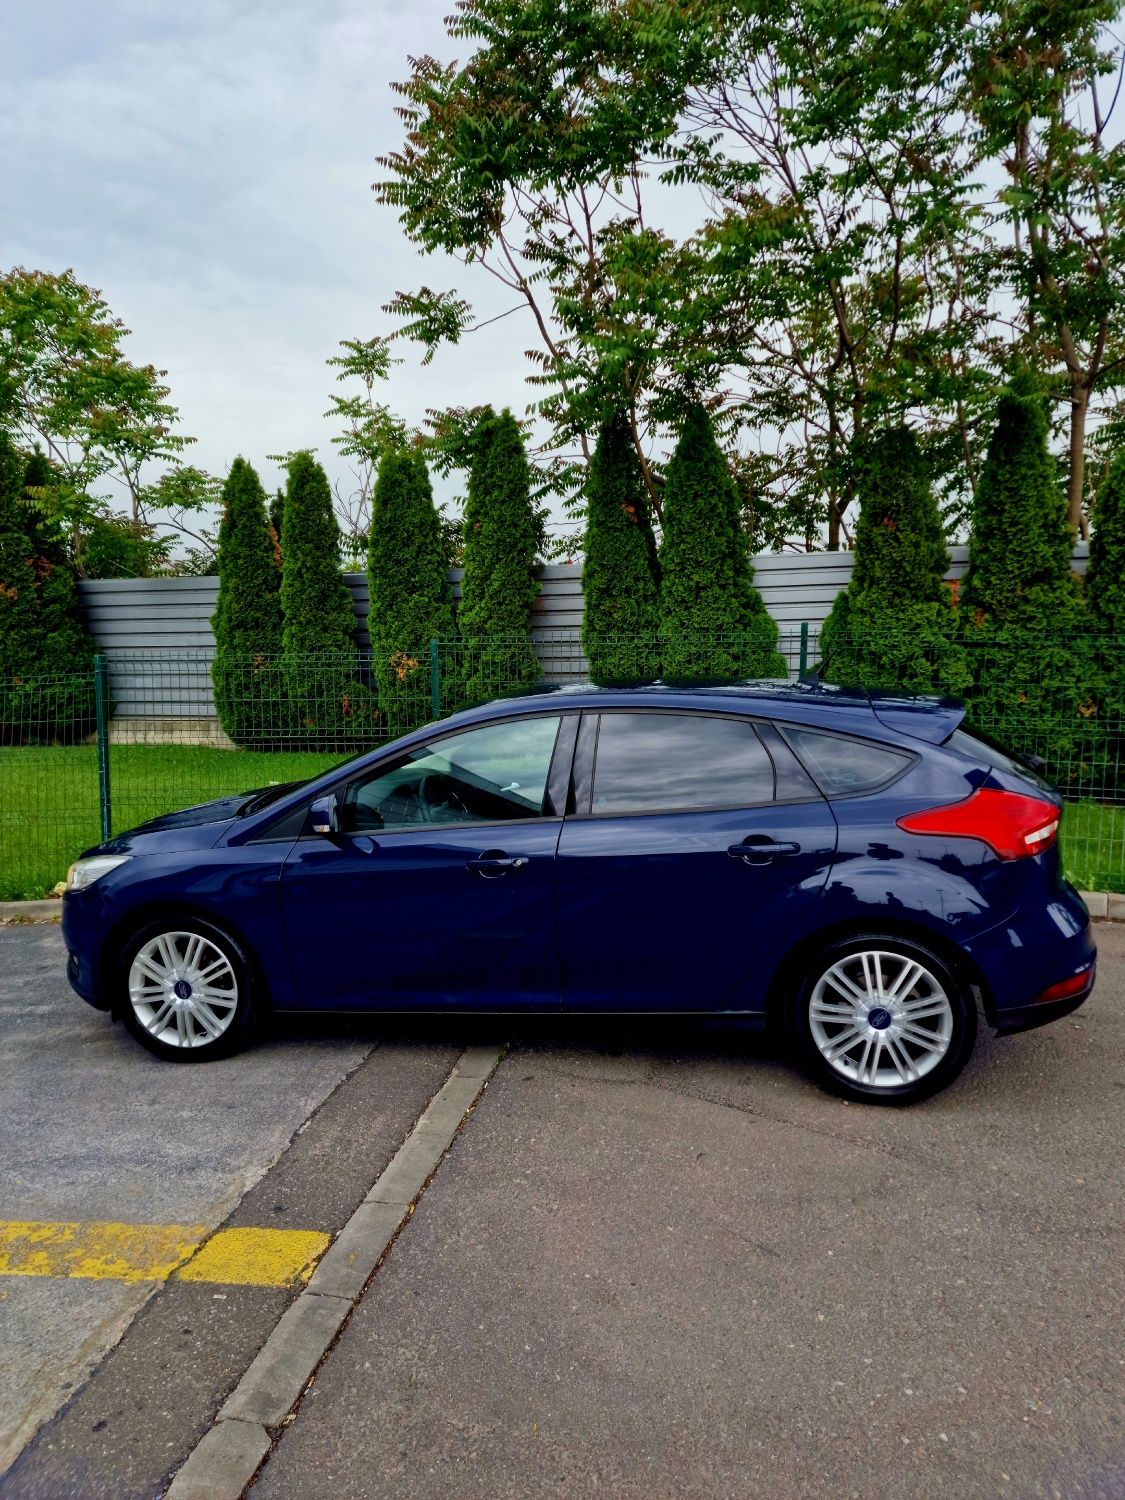 Ford Focus EcoboosT an 2015 - Euro 5 - Proprietar - Accept Orice Test